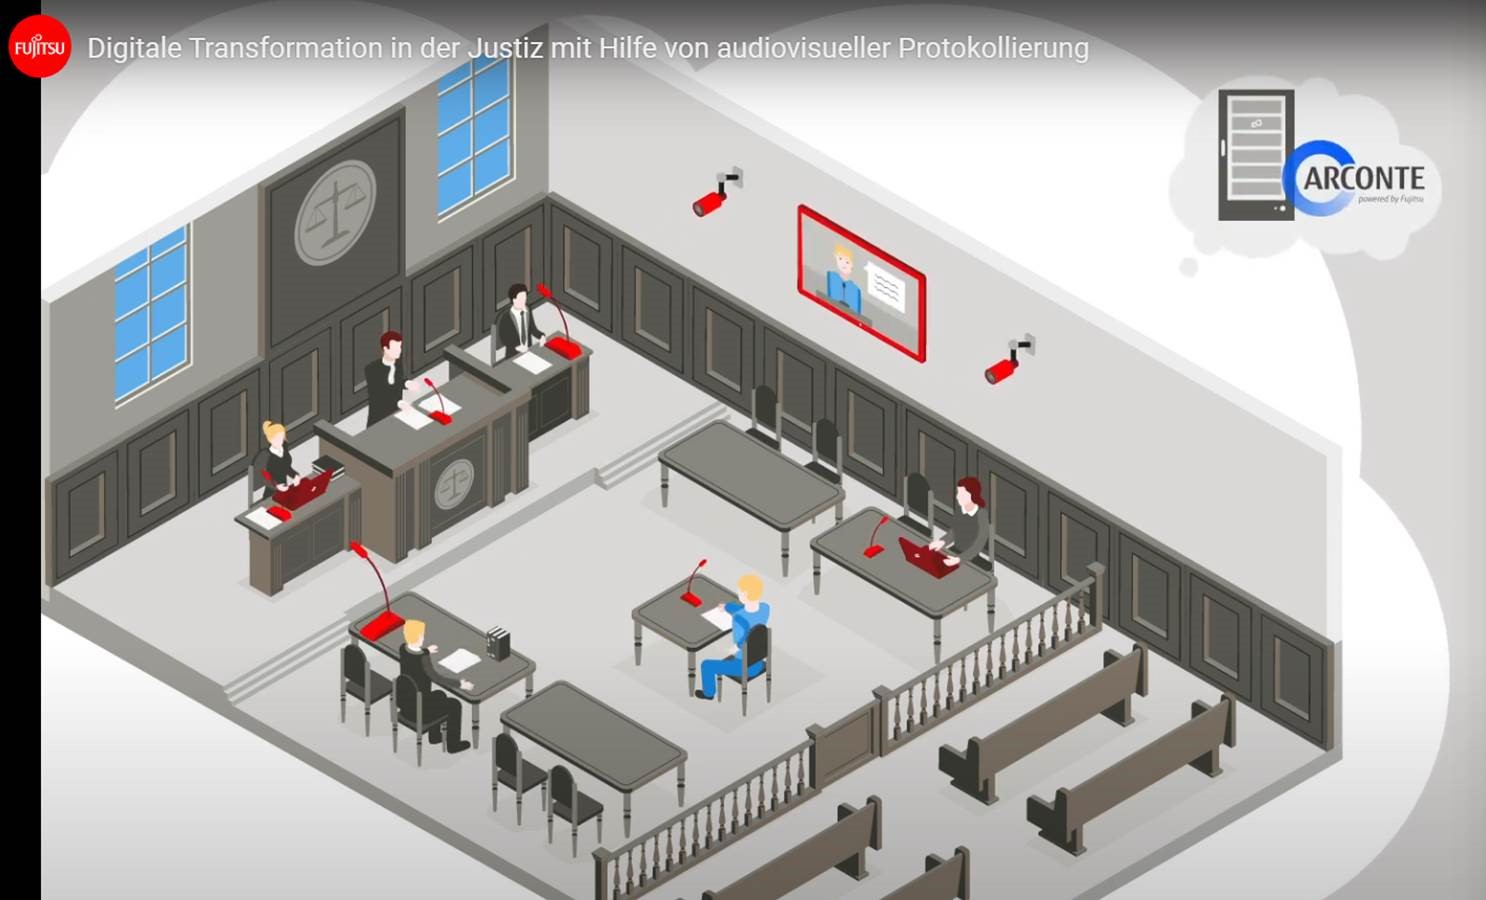 Main visual : Fujitsu helps bring the eCourtroom of the future to Cologne